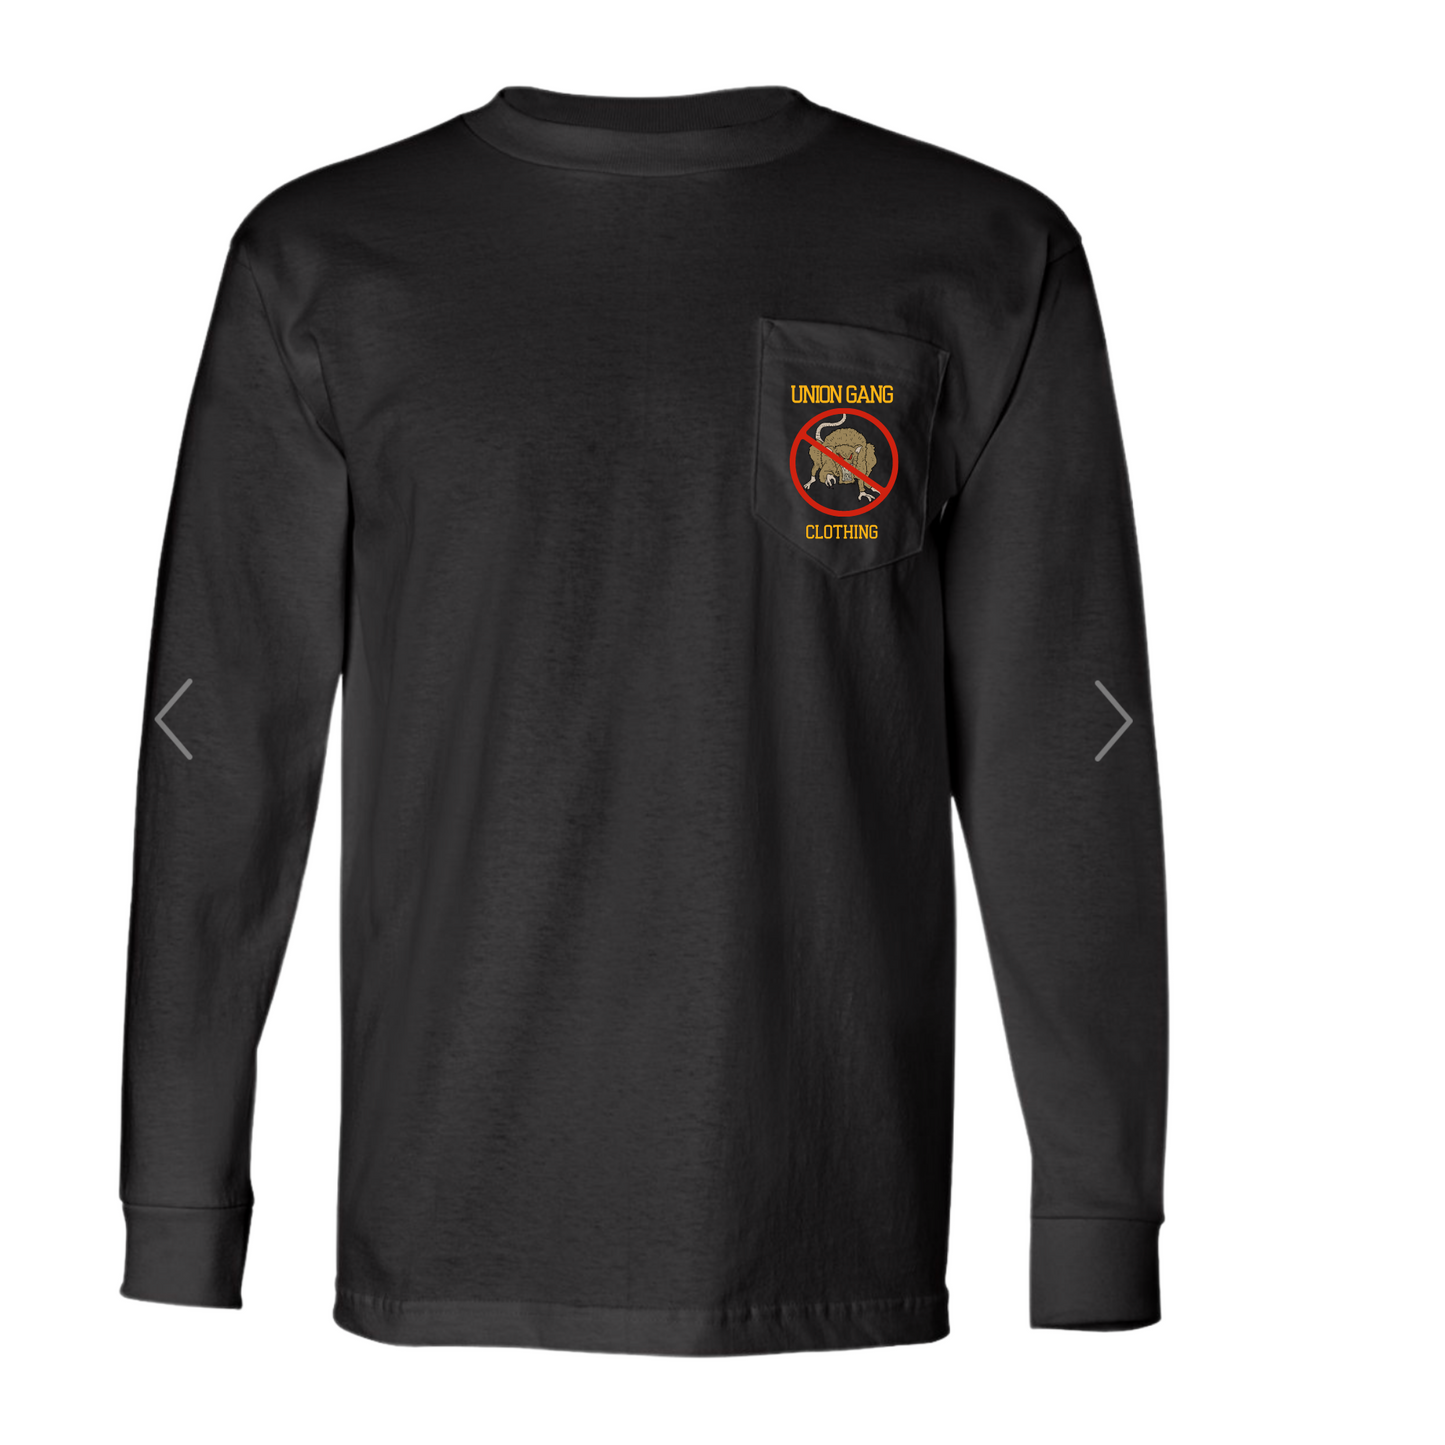 NO SCABS LONG SLEEVE POCKET T-SHIRT